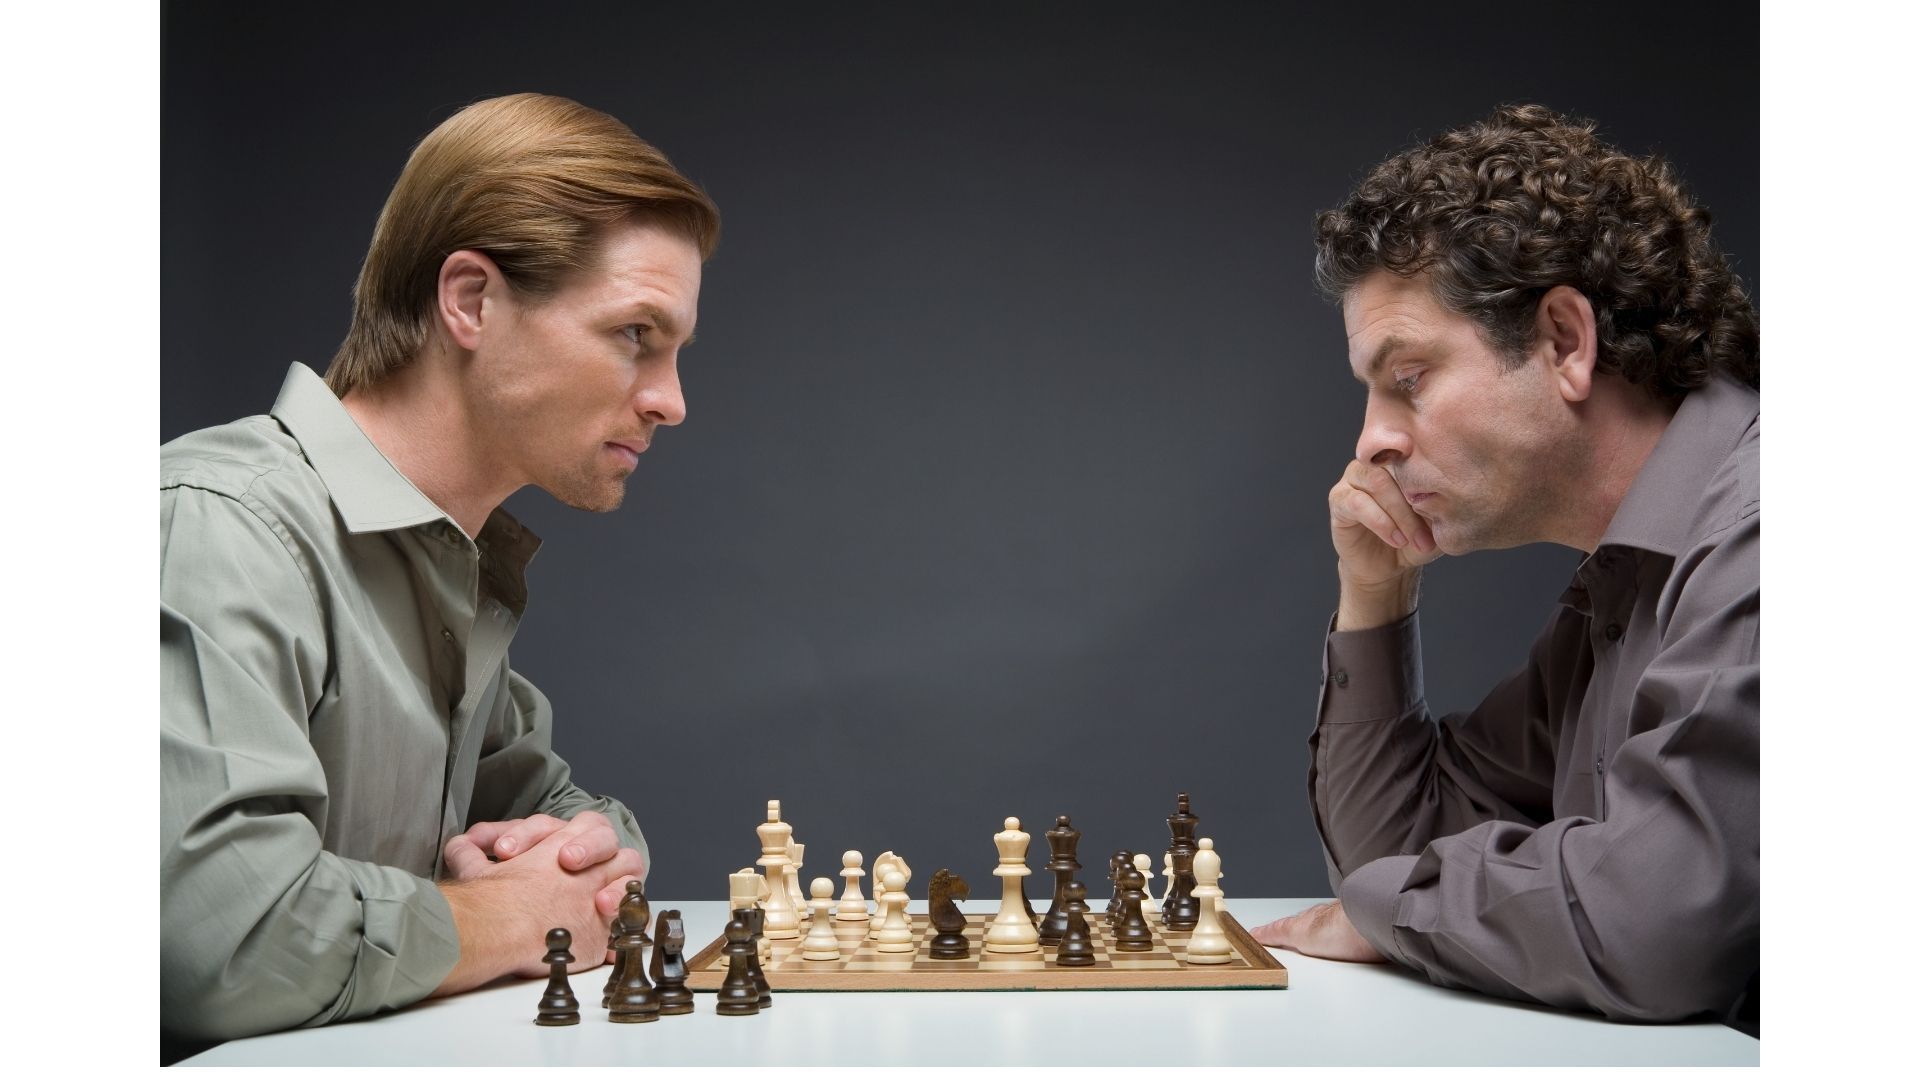 If I play chess everyday, will my IQ increase by 10 points? - Quora